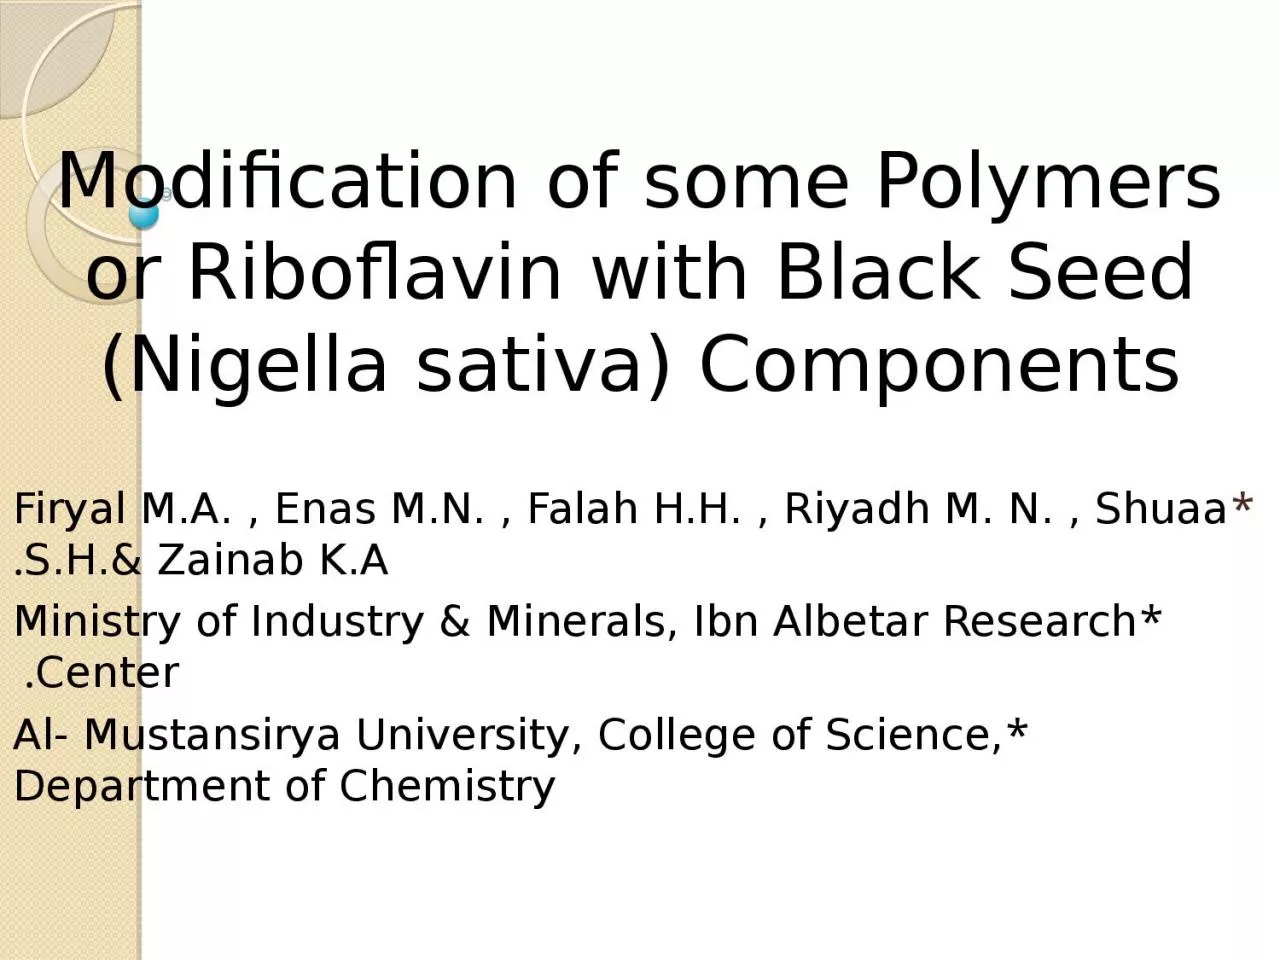 Modification of some Polymers or Riboflavin with Black Seed